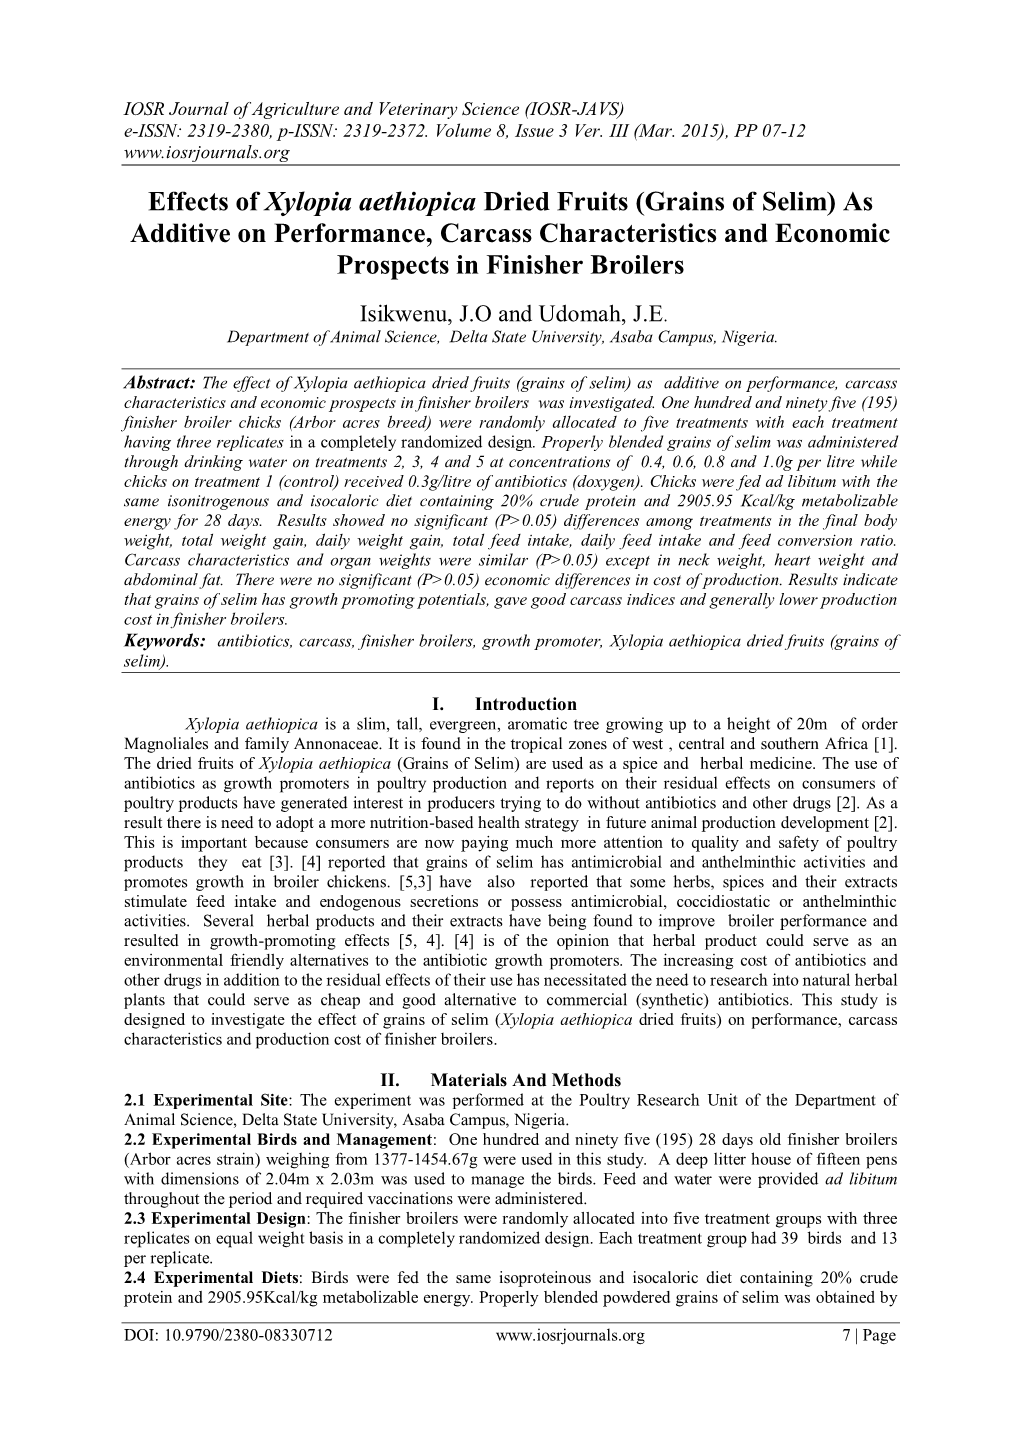 Effects of Xylopia Aethiopica Dried Fruits (Grains of Selim) As Additive on Performance, Carcass Characteristics and Economic Prospects in Finisher Broilers